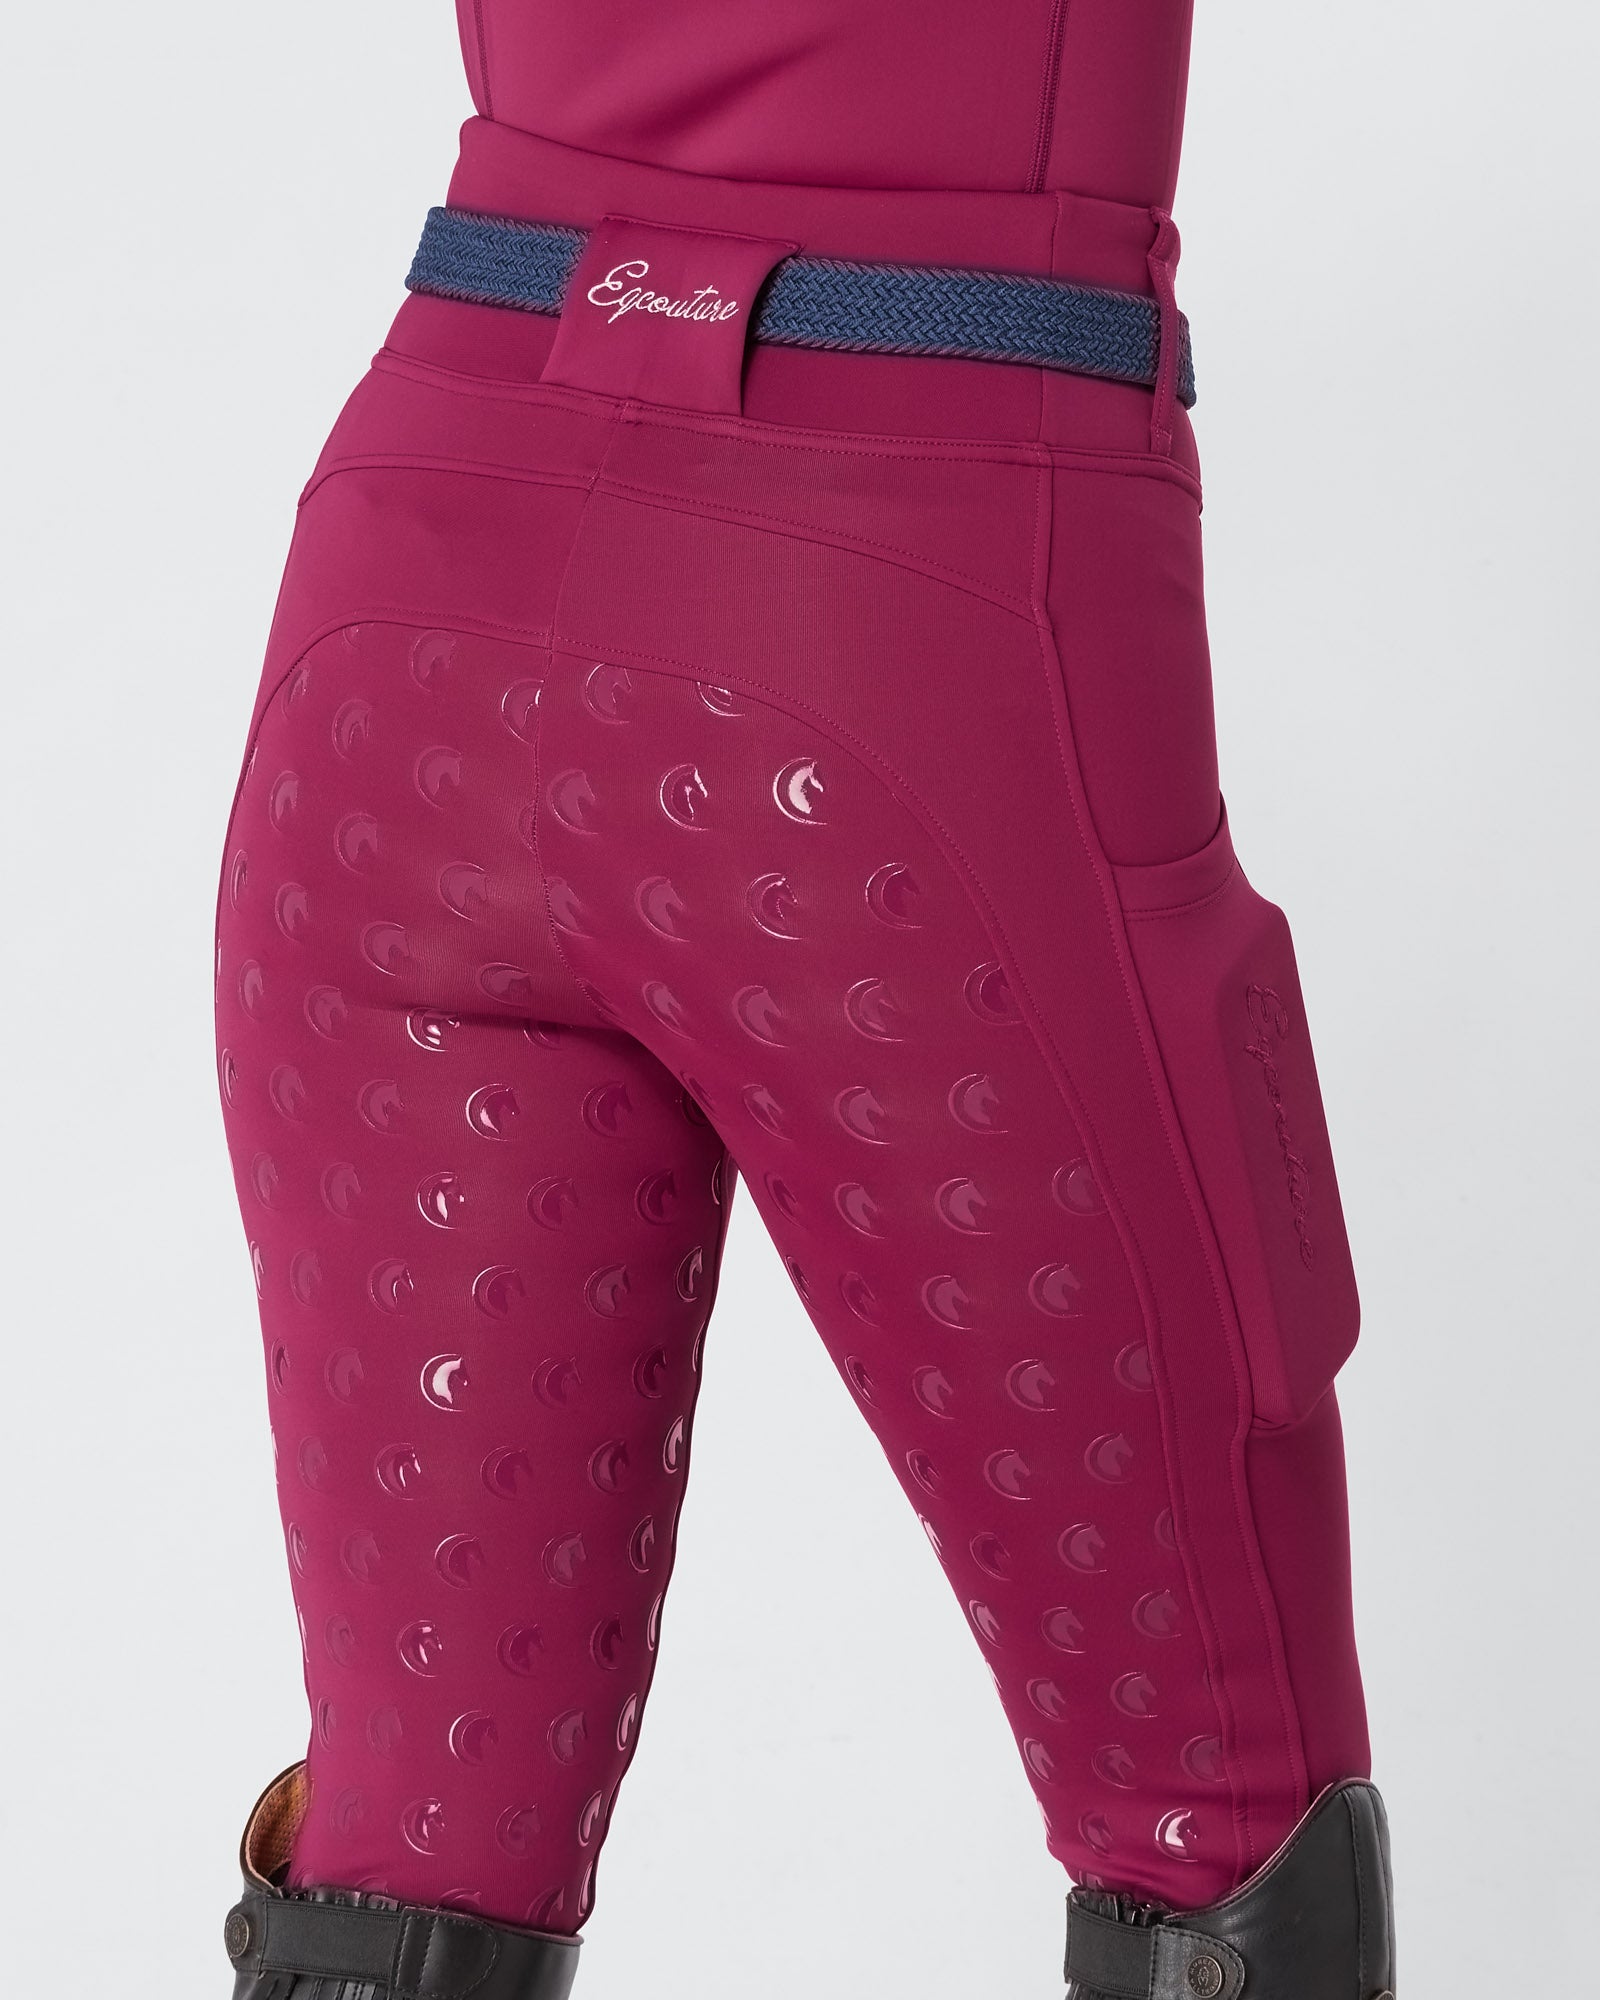 WINTER Thermal Deep Ruby Riding Leggings / Tights with Phone Pockets - WATER RESISTANT